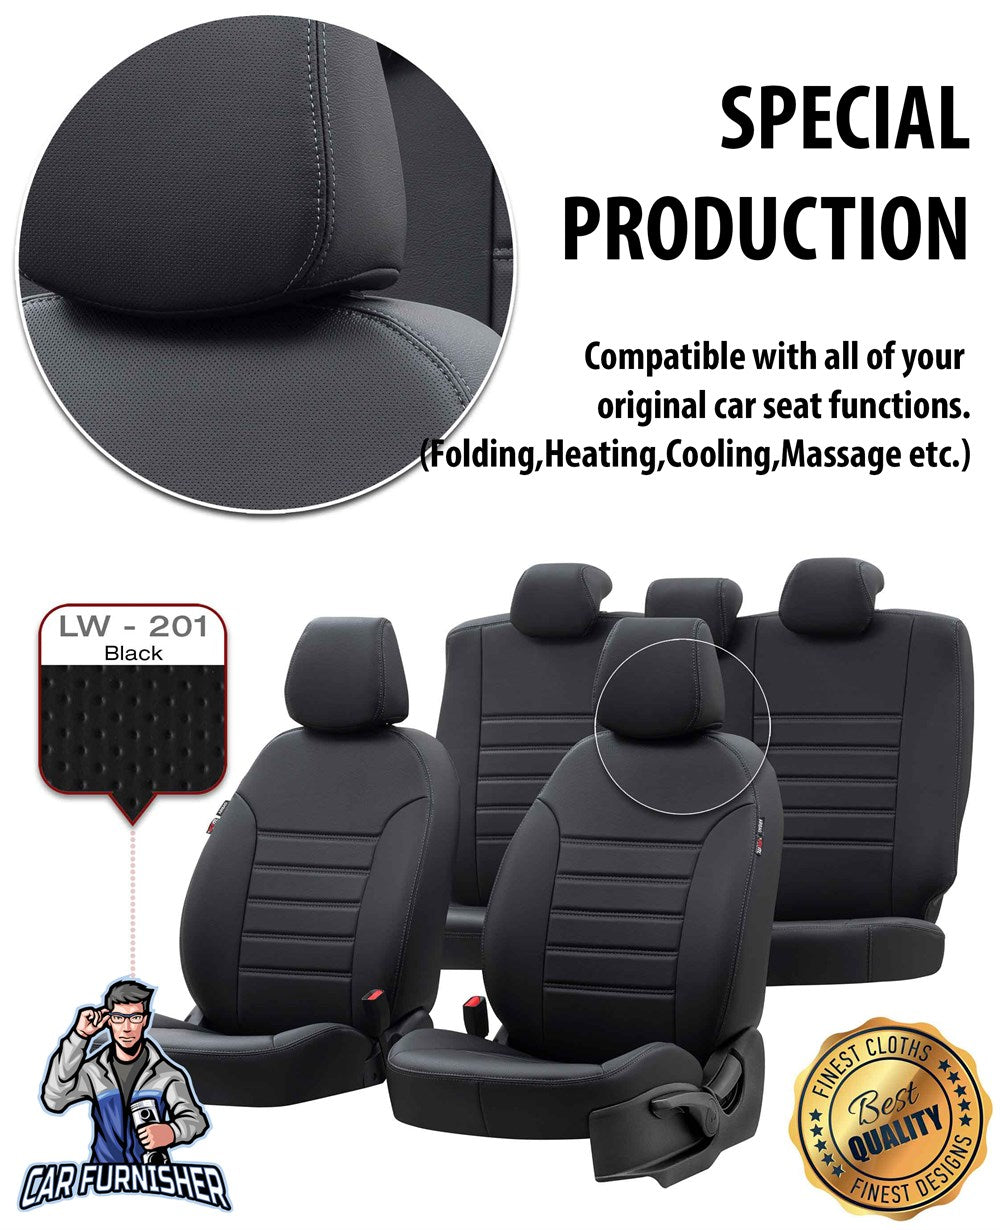 Dodge Nitro Seat Cover Istanbul Leather Design Smoked Black Leather